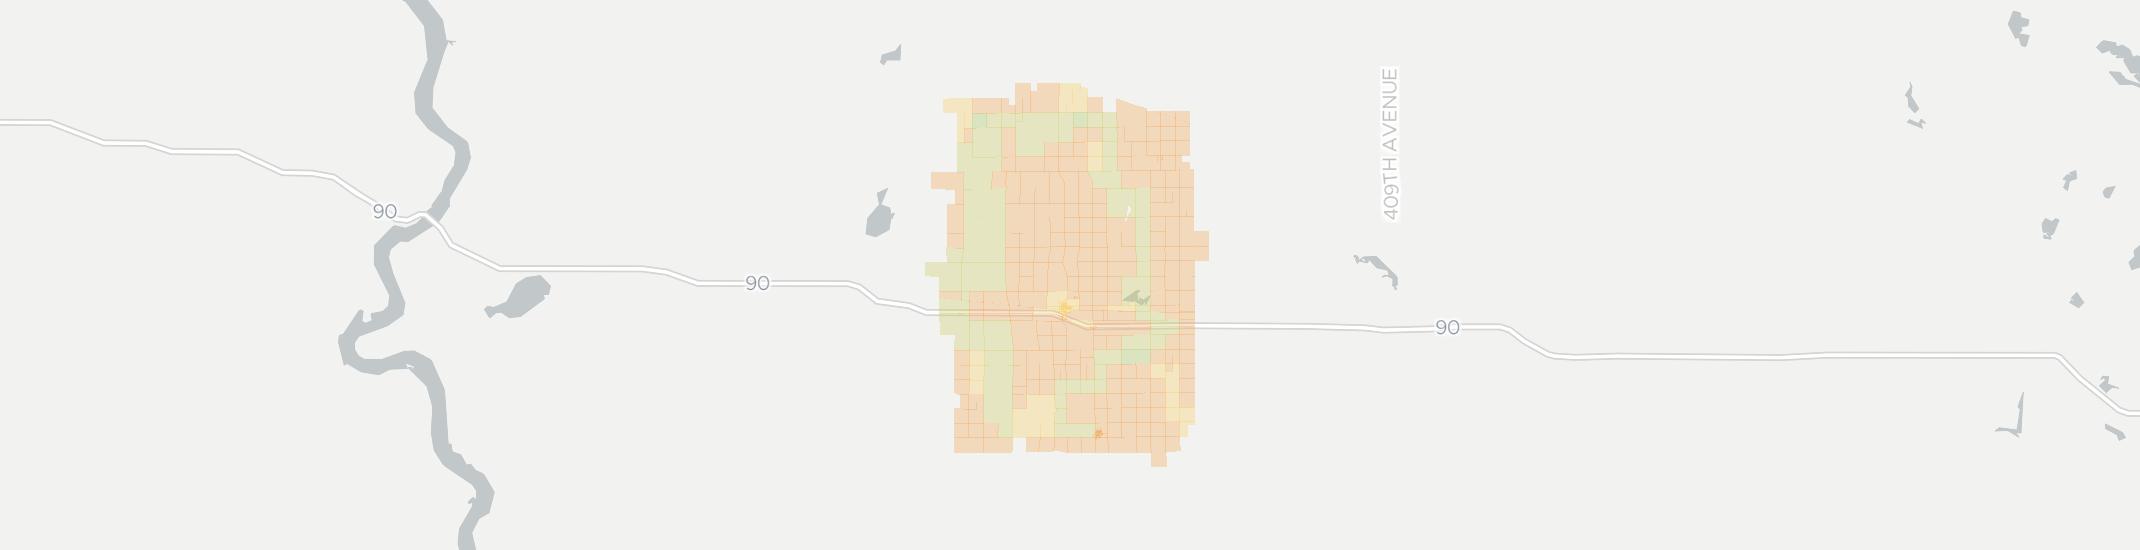 Plankinton Internet Competition Map. Click for interactive map.